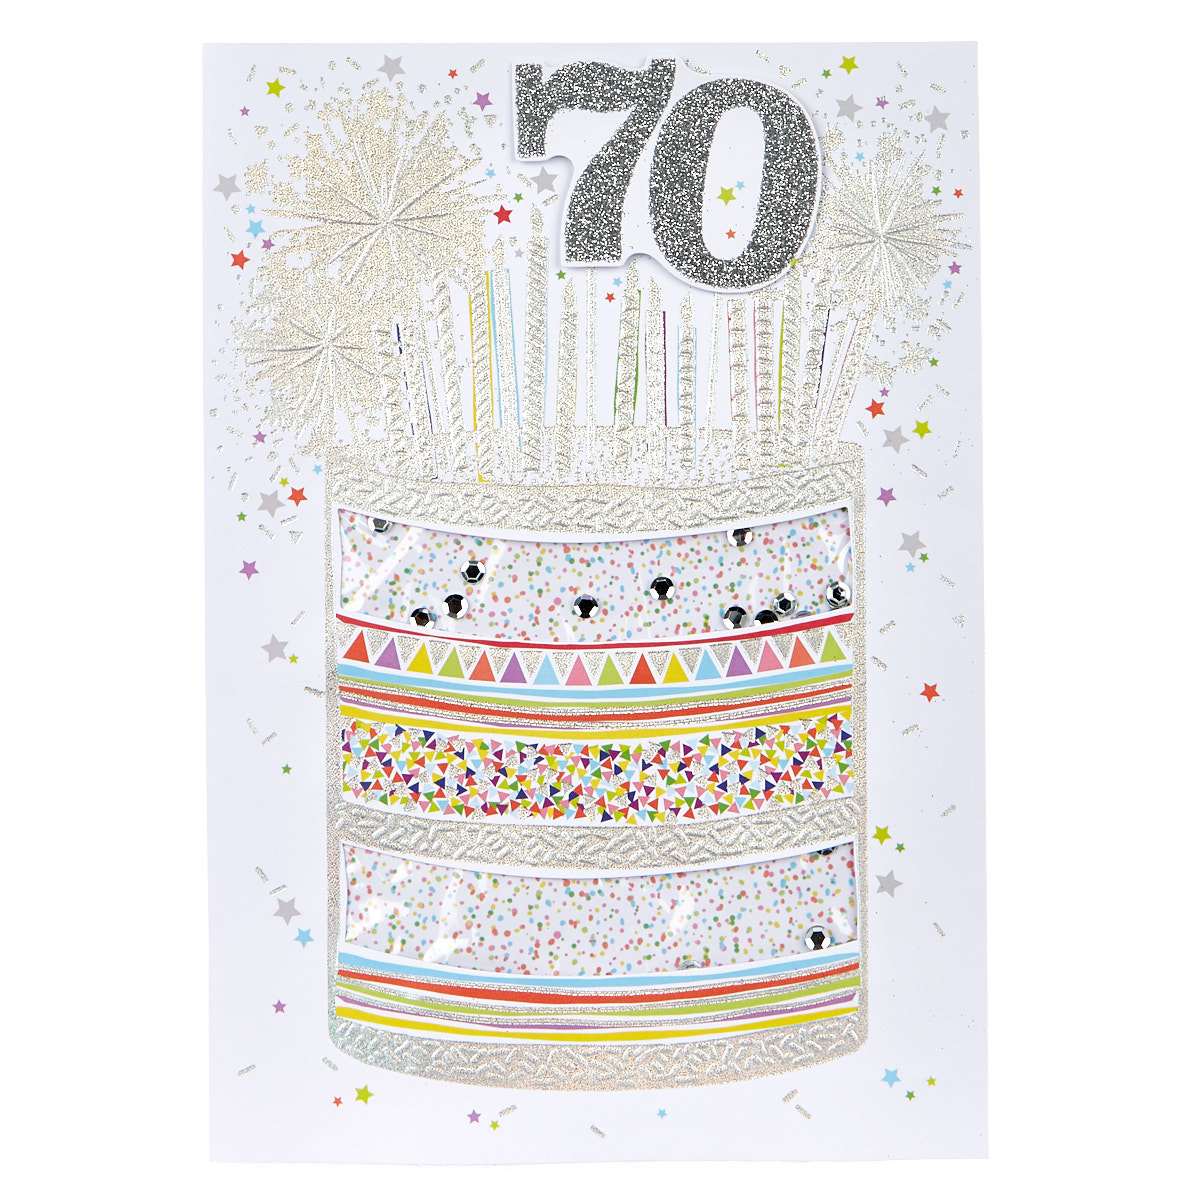 70th Birthday Card - Silver Cake & Candles